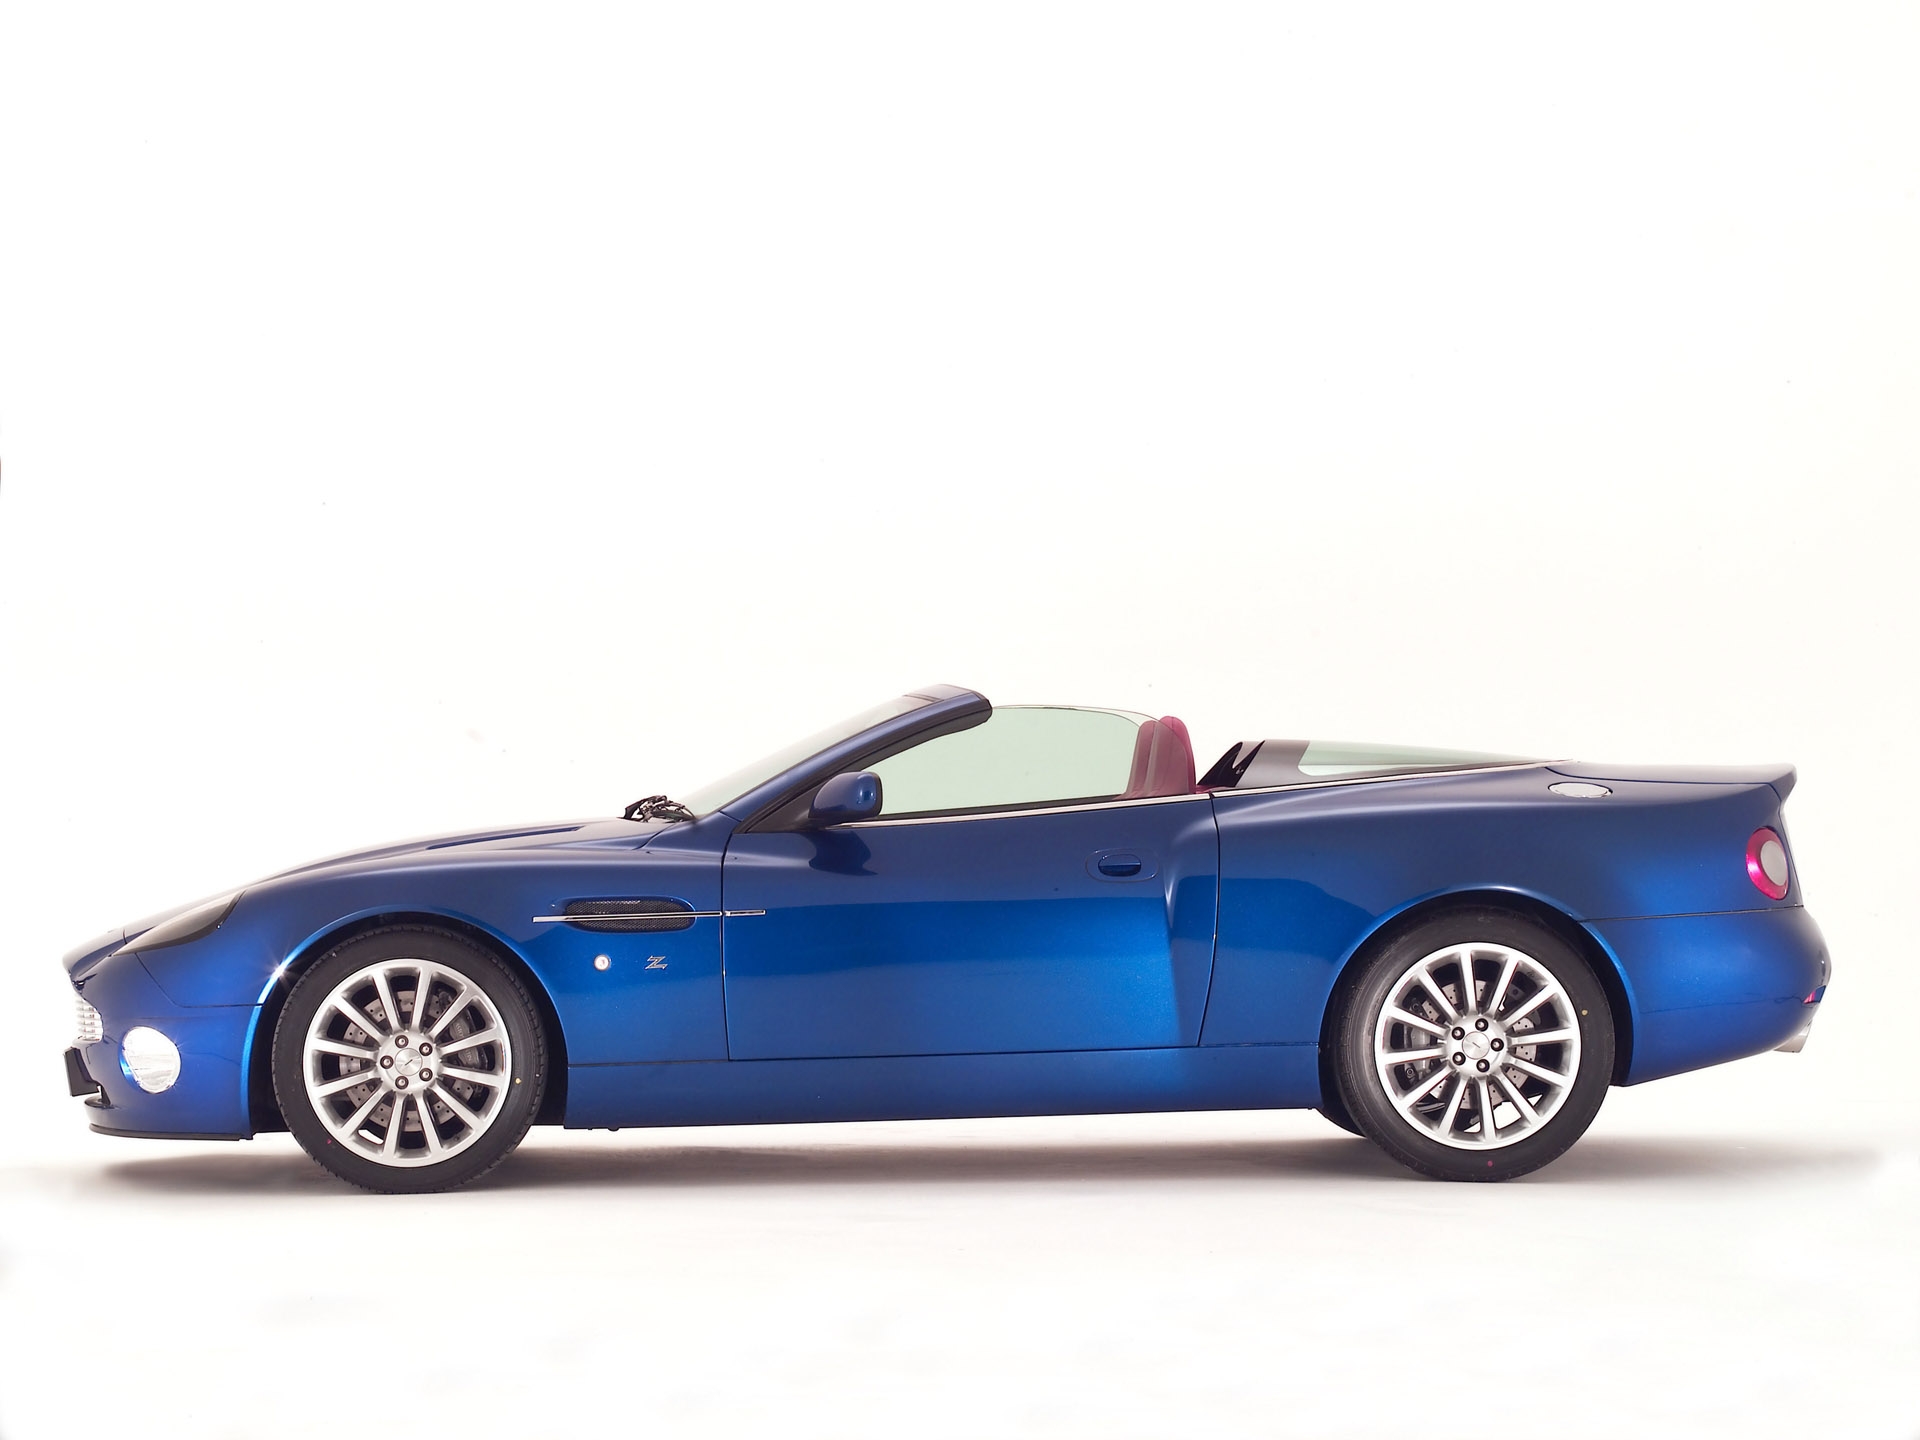 Cool Wallpapers aston martin, auto, cars, blue, side view, style, 2004, v12, vanquish